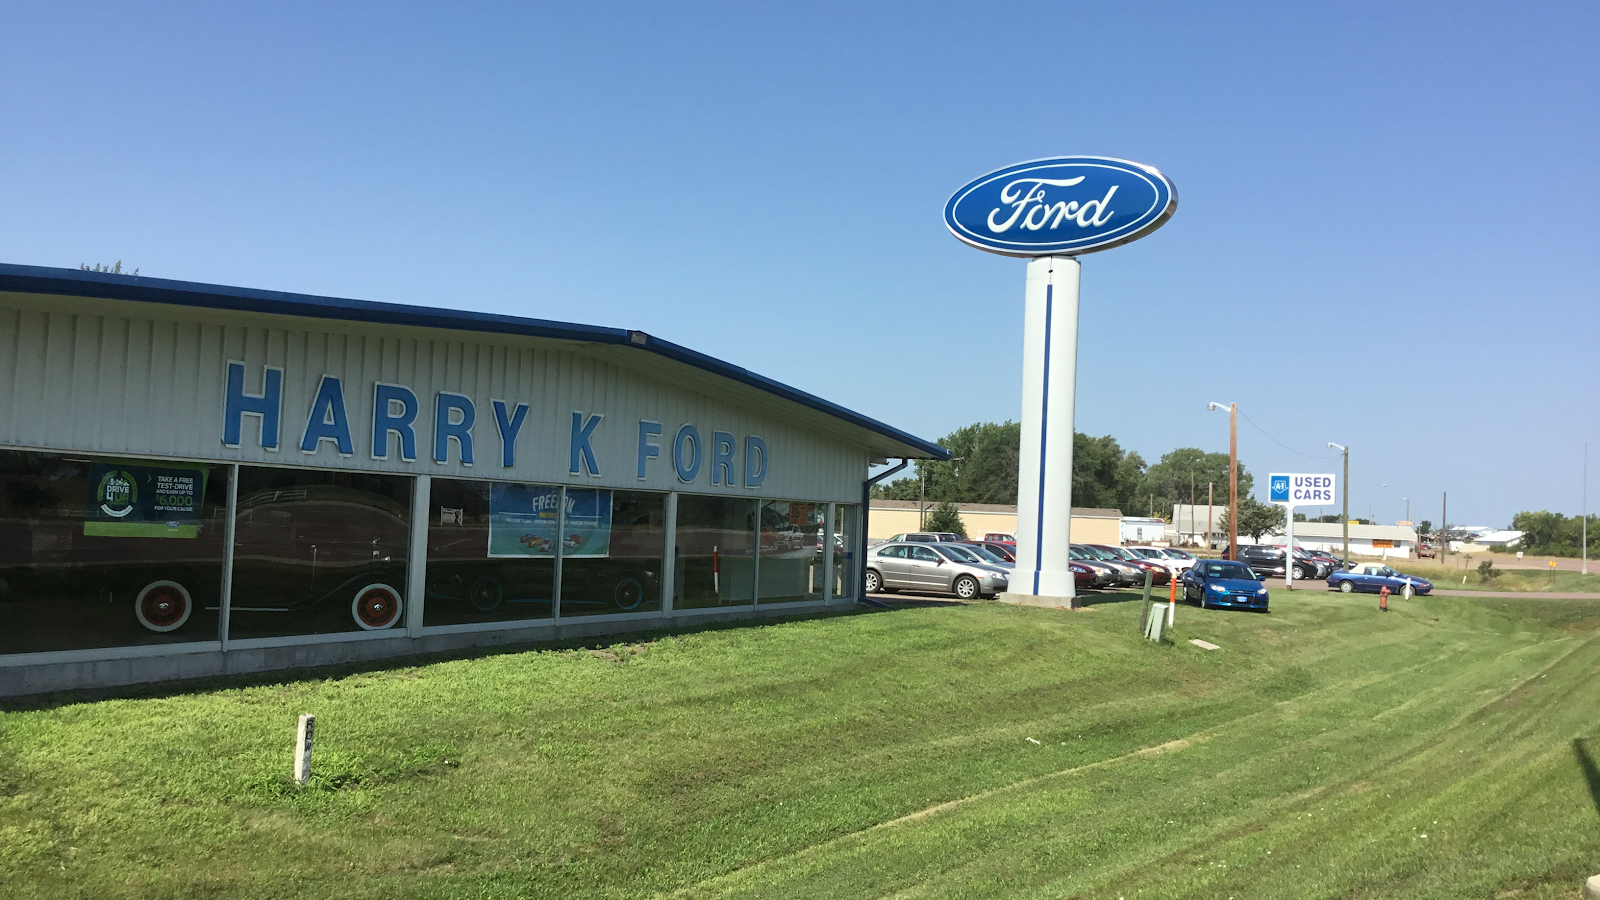 Harry K Ford Store, Inc.